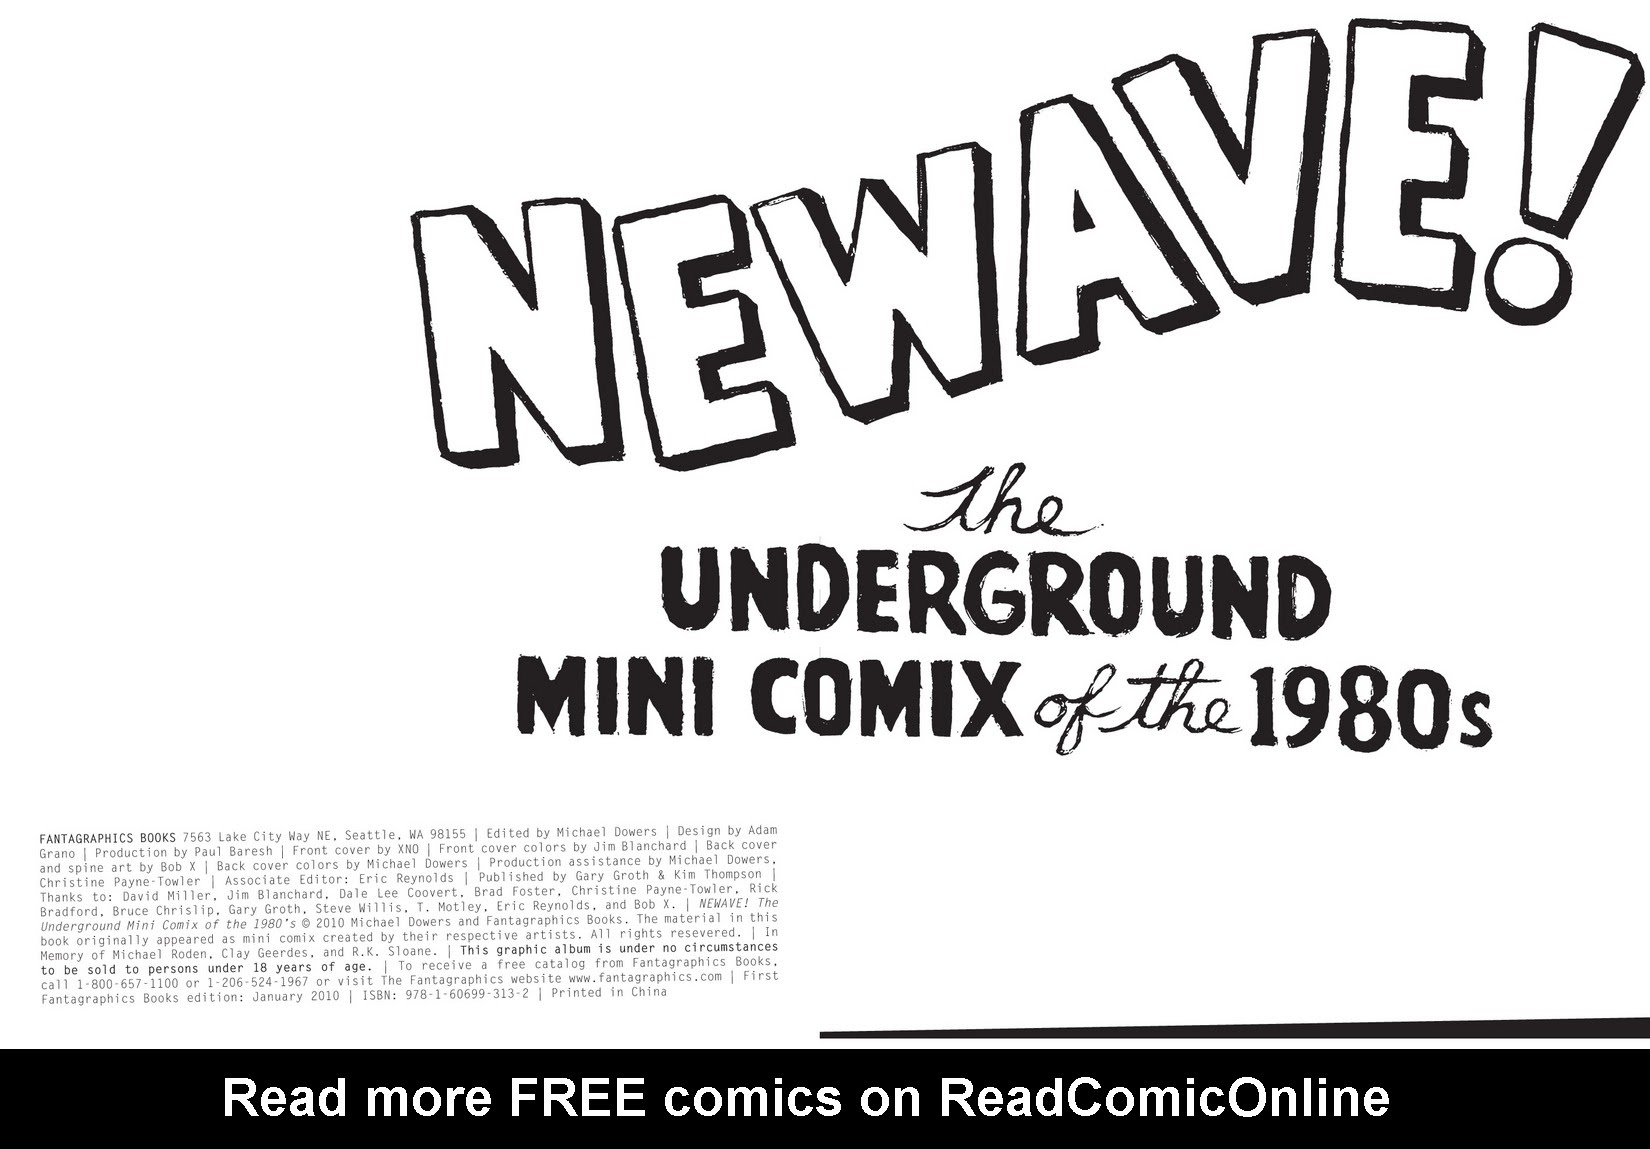 Read online NEWAVE! The Underground Mini Comix of the 1980's comic -  Issue # TPB (Part 1) - 3